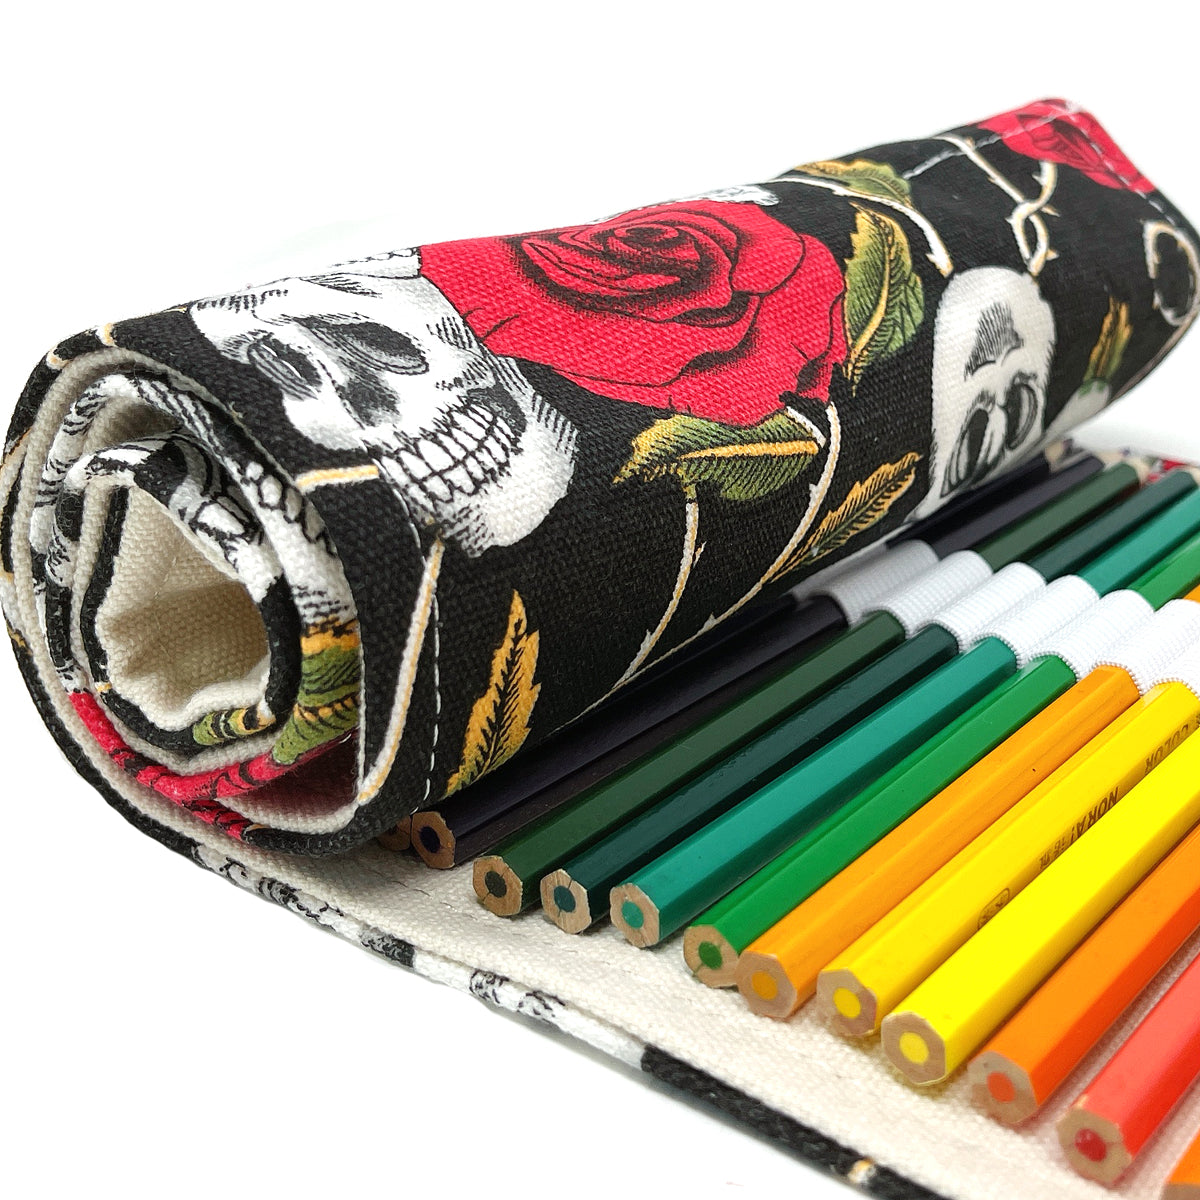 Pencils Roll Up Case - Roses - Live in Colors